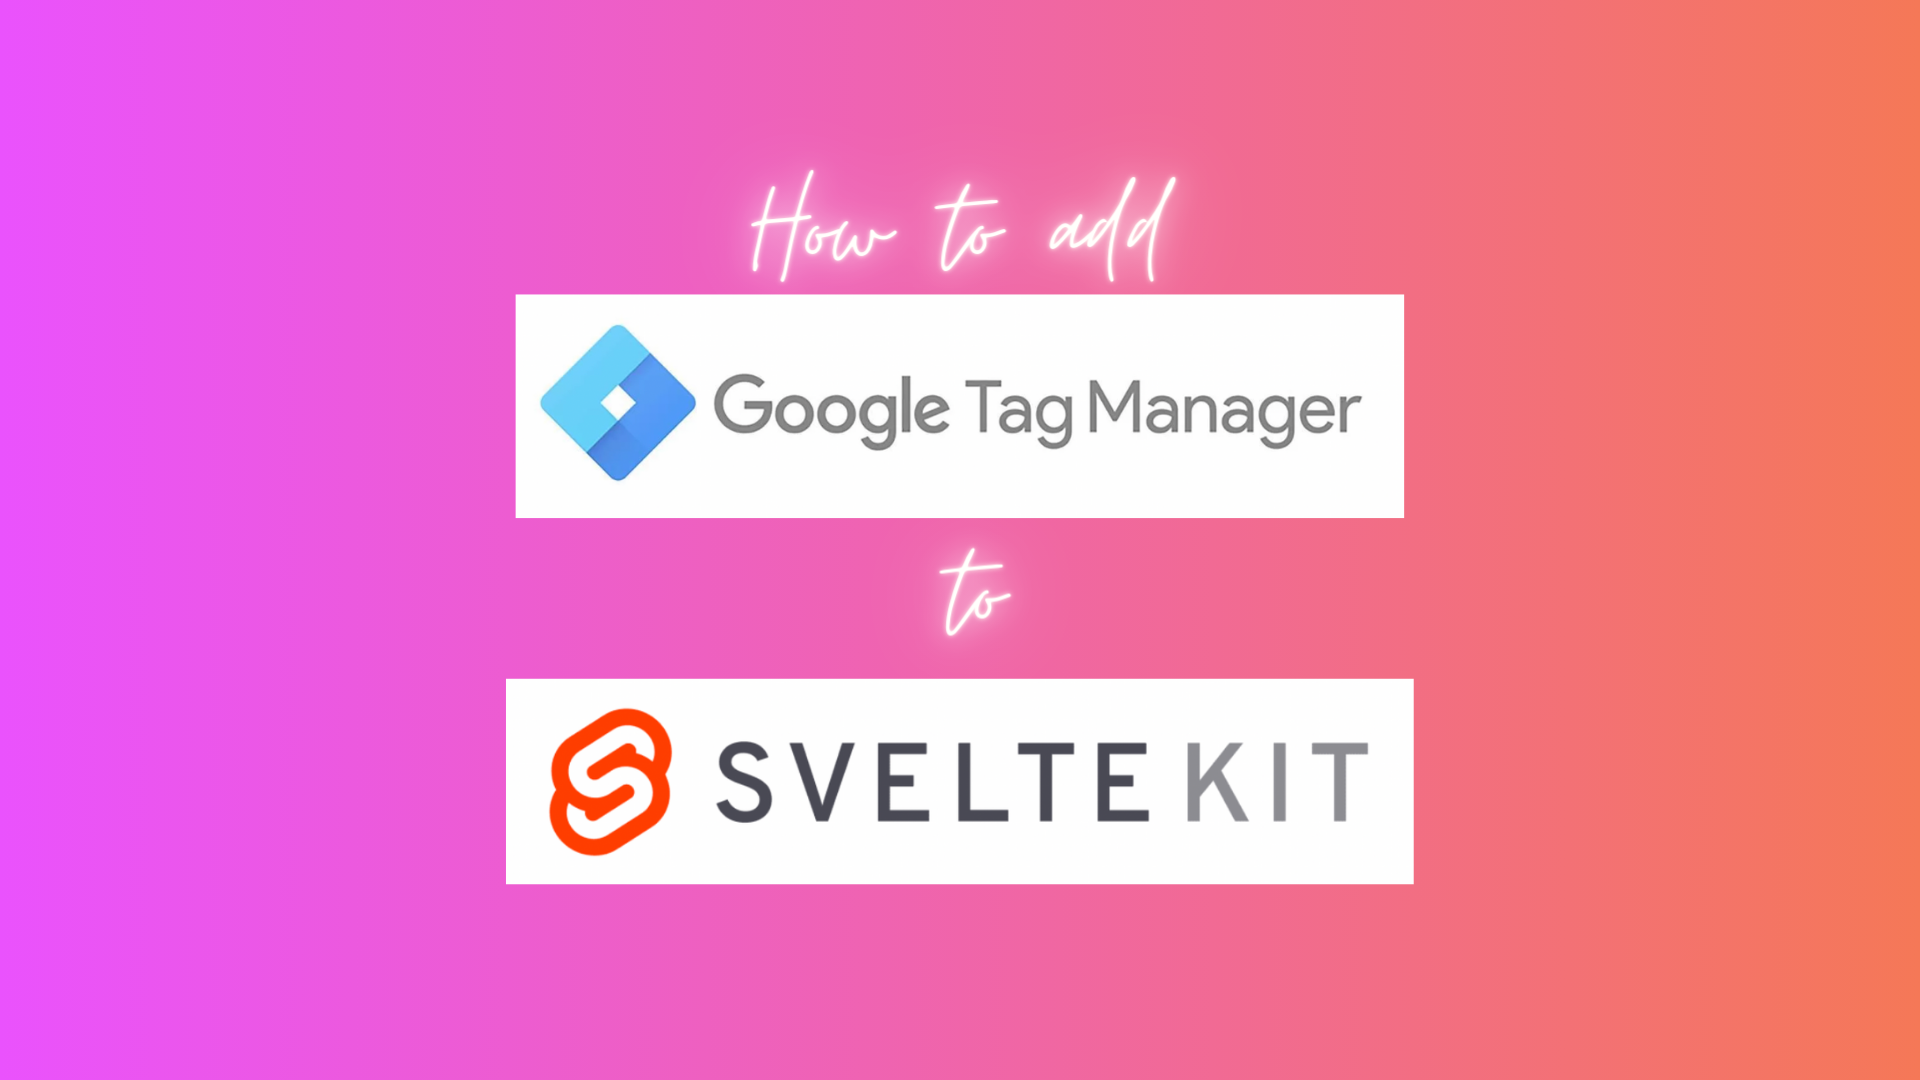 How to add Google Tag Manager (GTM) to SvelteKit Applications